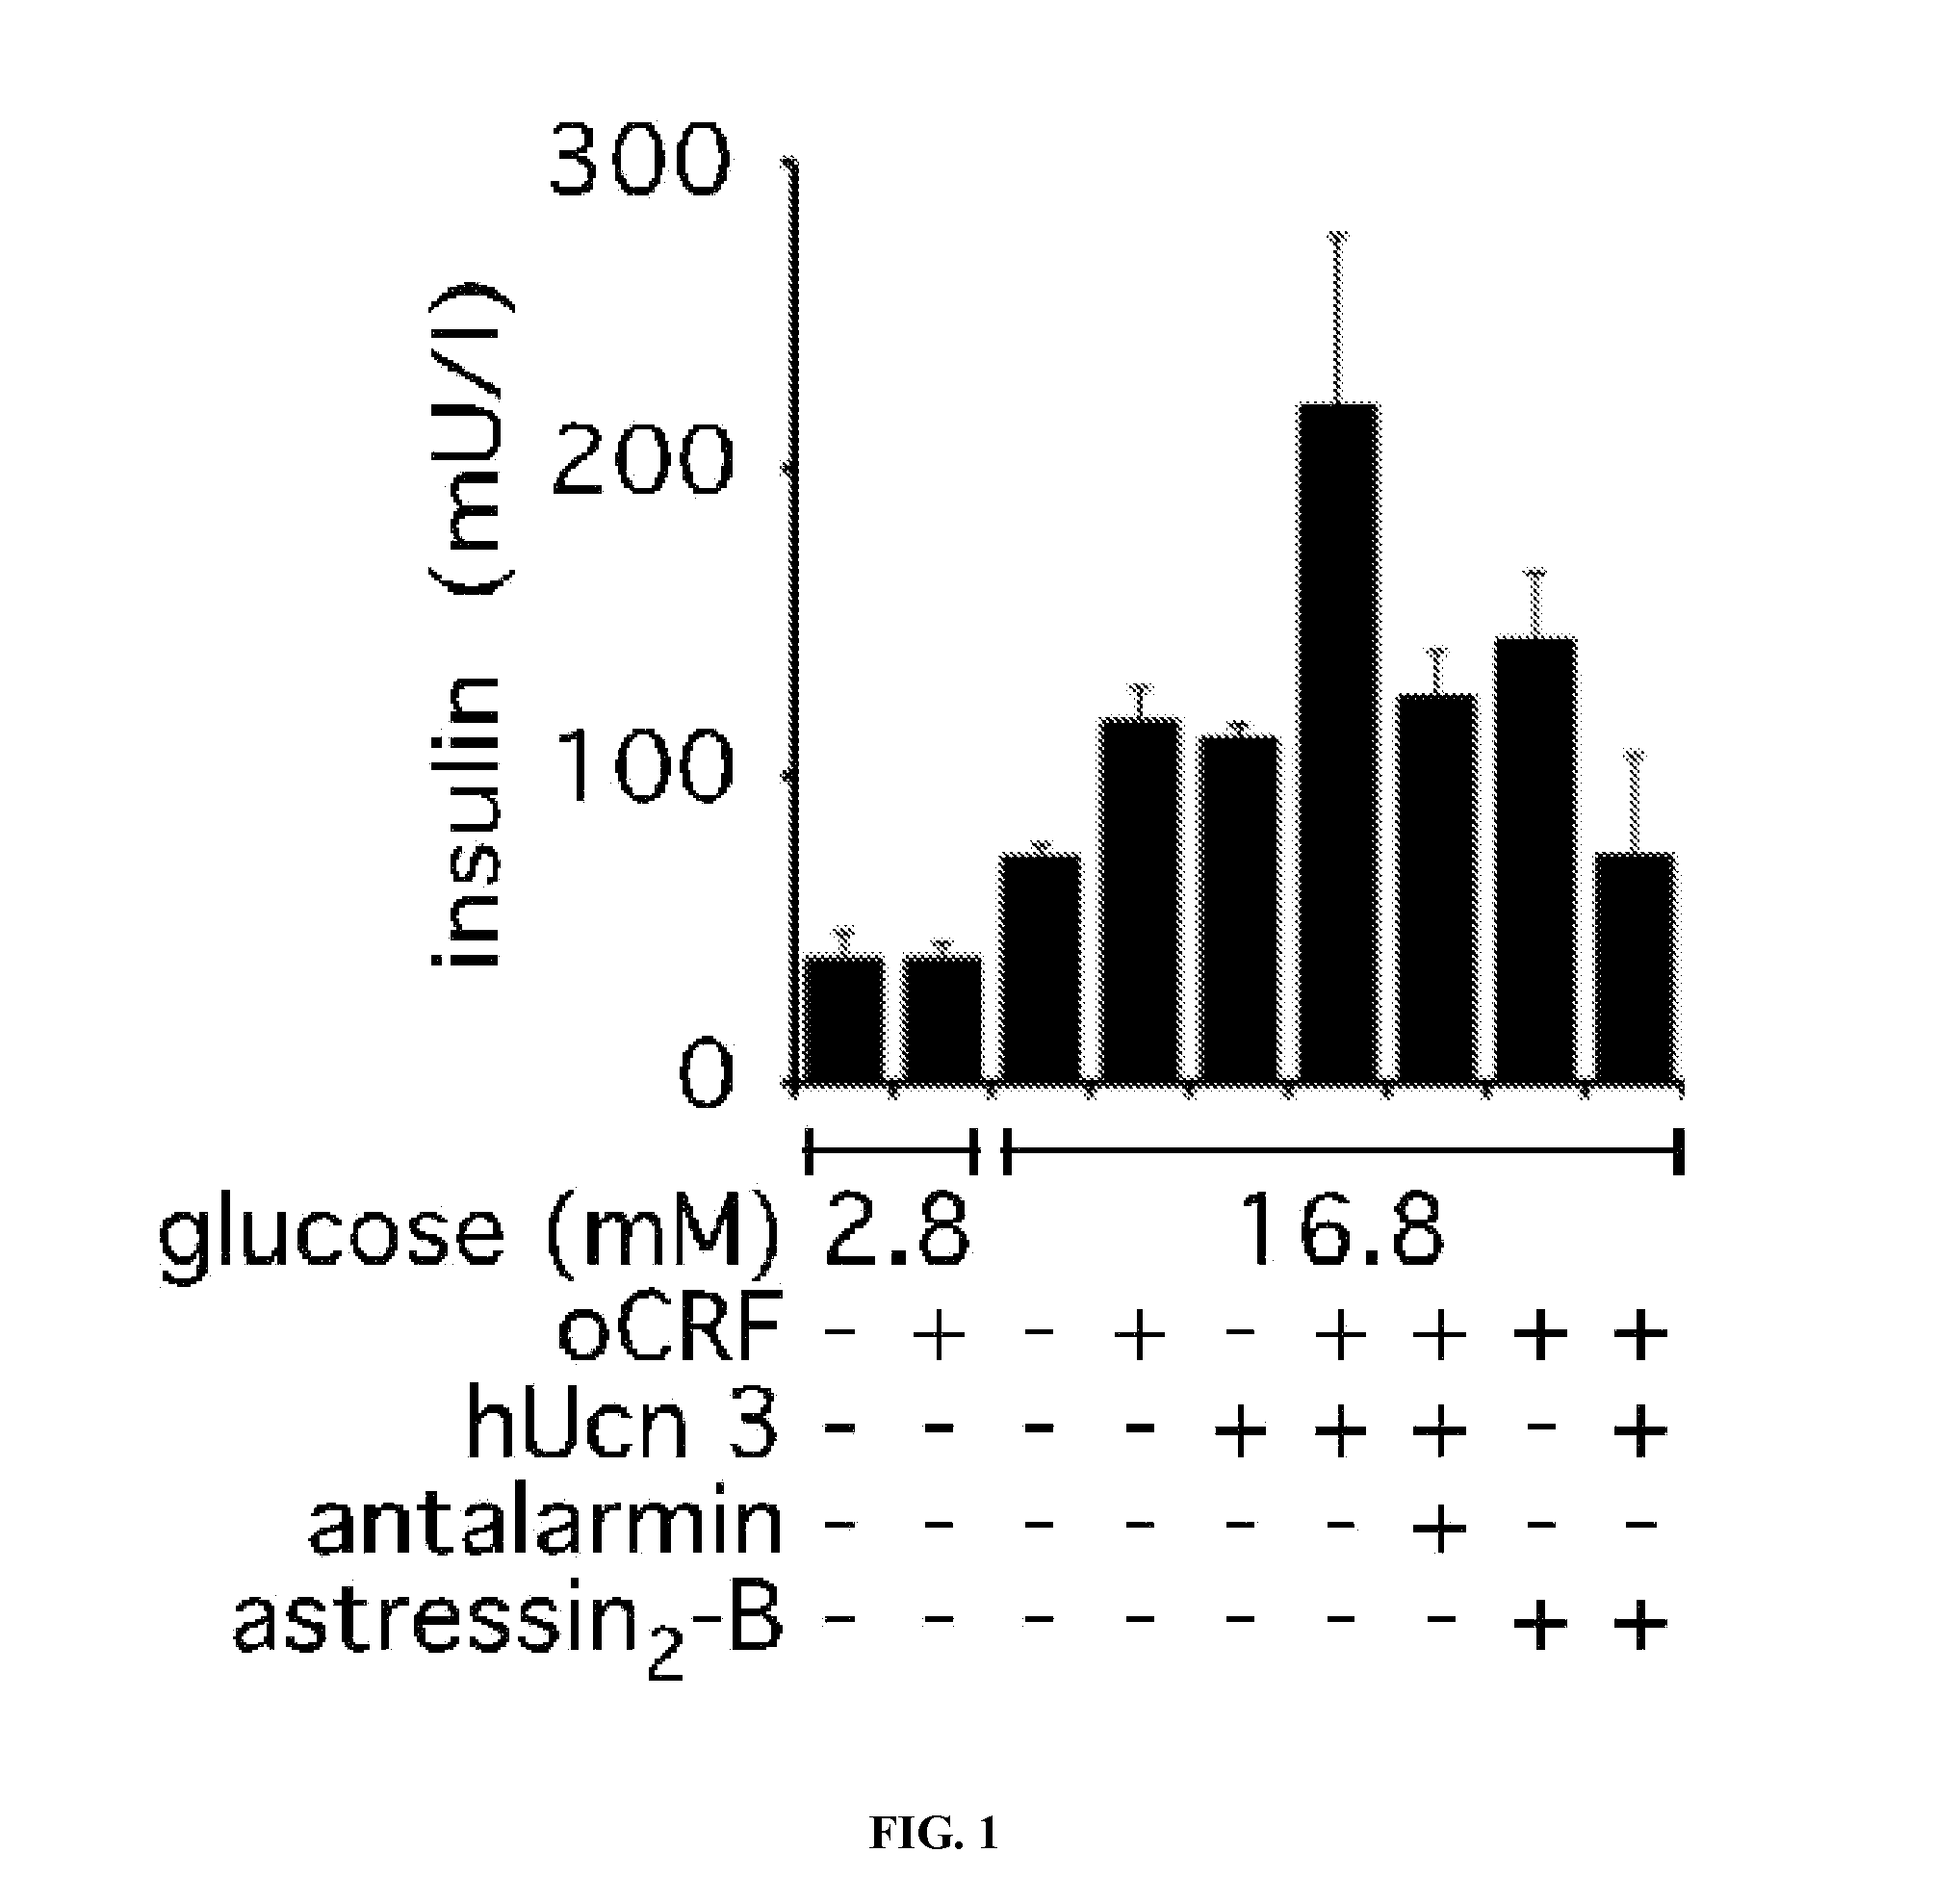 Methods for increasing insulin secretion by co-stimulation of corticotropin-releasing factor receptors